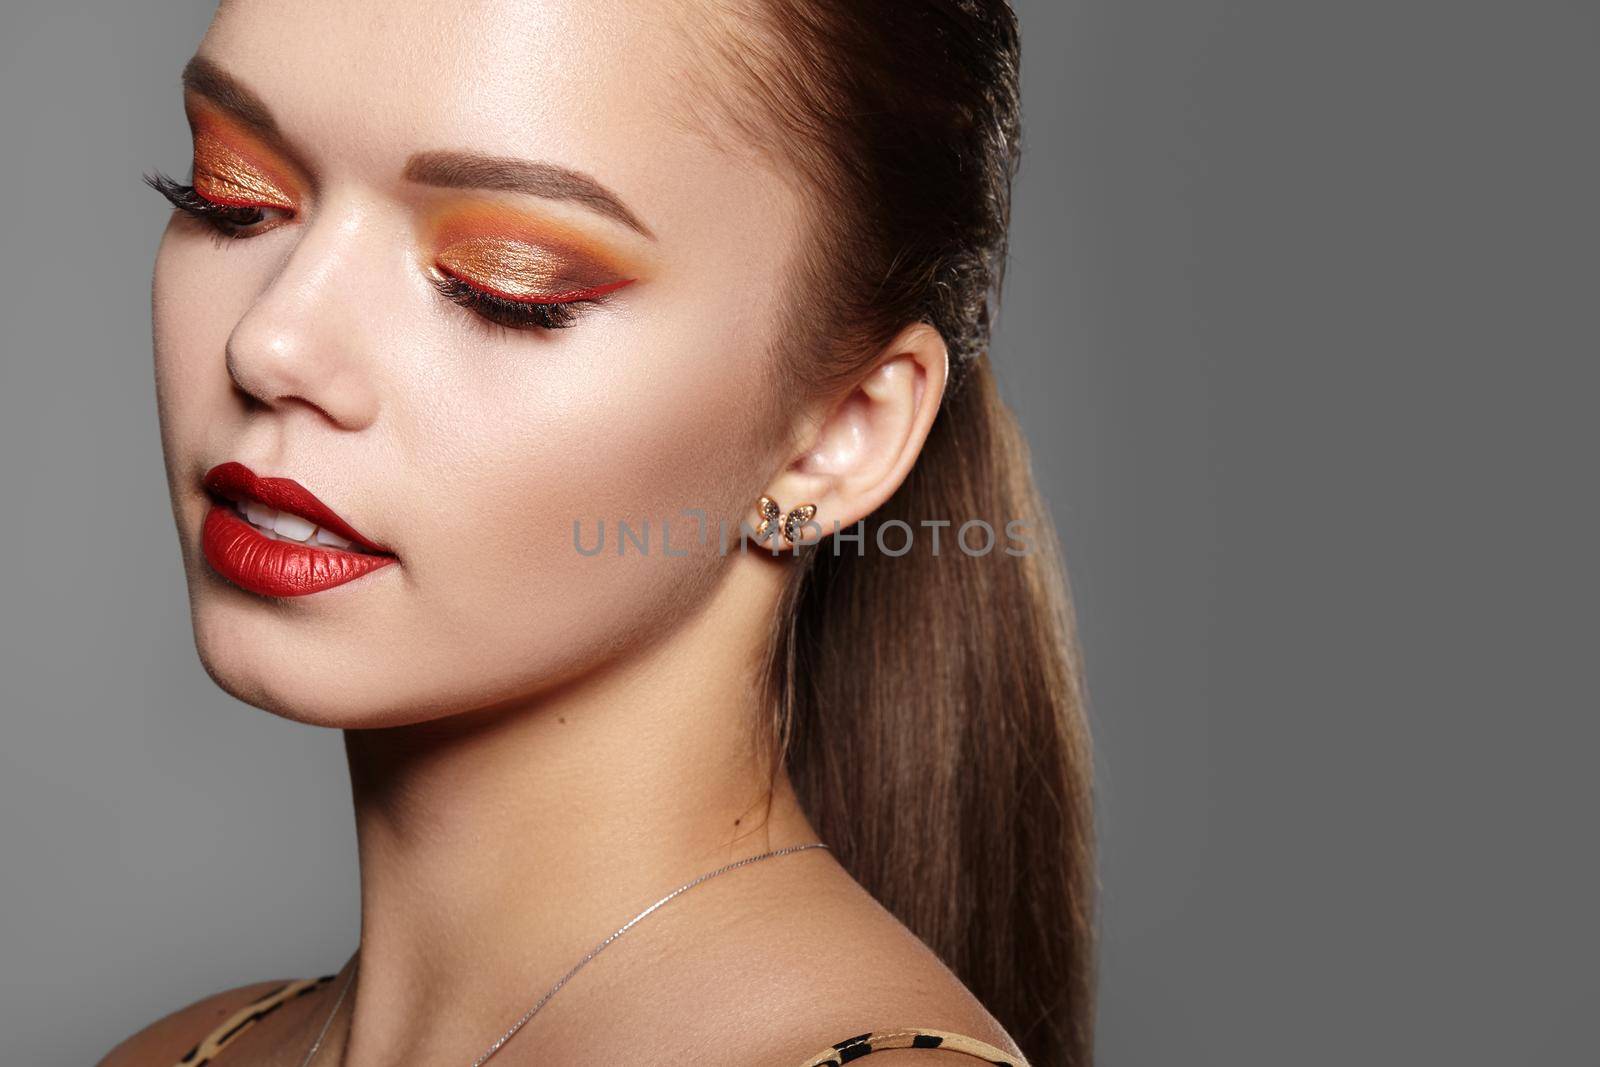 Closeup portrait of Woman Face with Gold glitter Make-up, bright red liner on Eyes. Fashion Celebrate Makeup, Glowy Skin. Shiny Simmer and metalic eye shadows